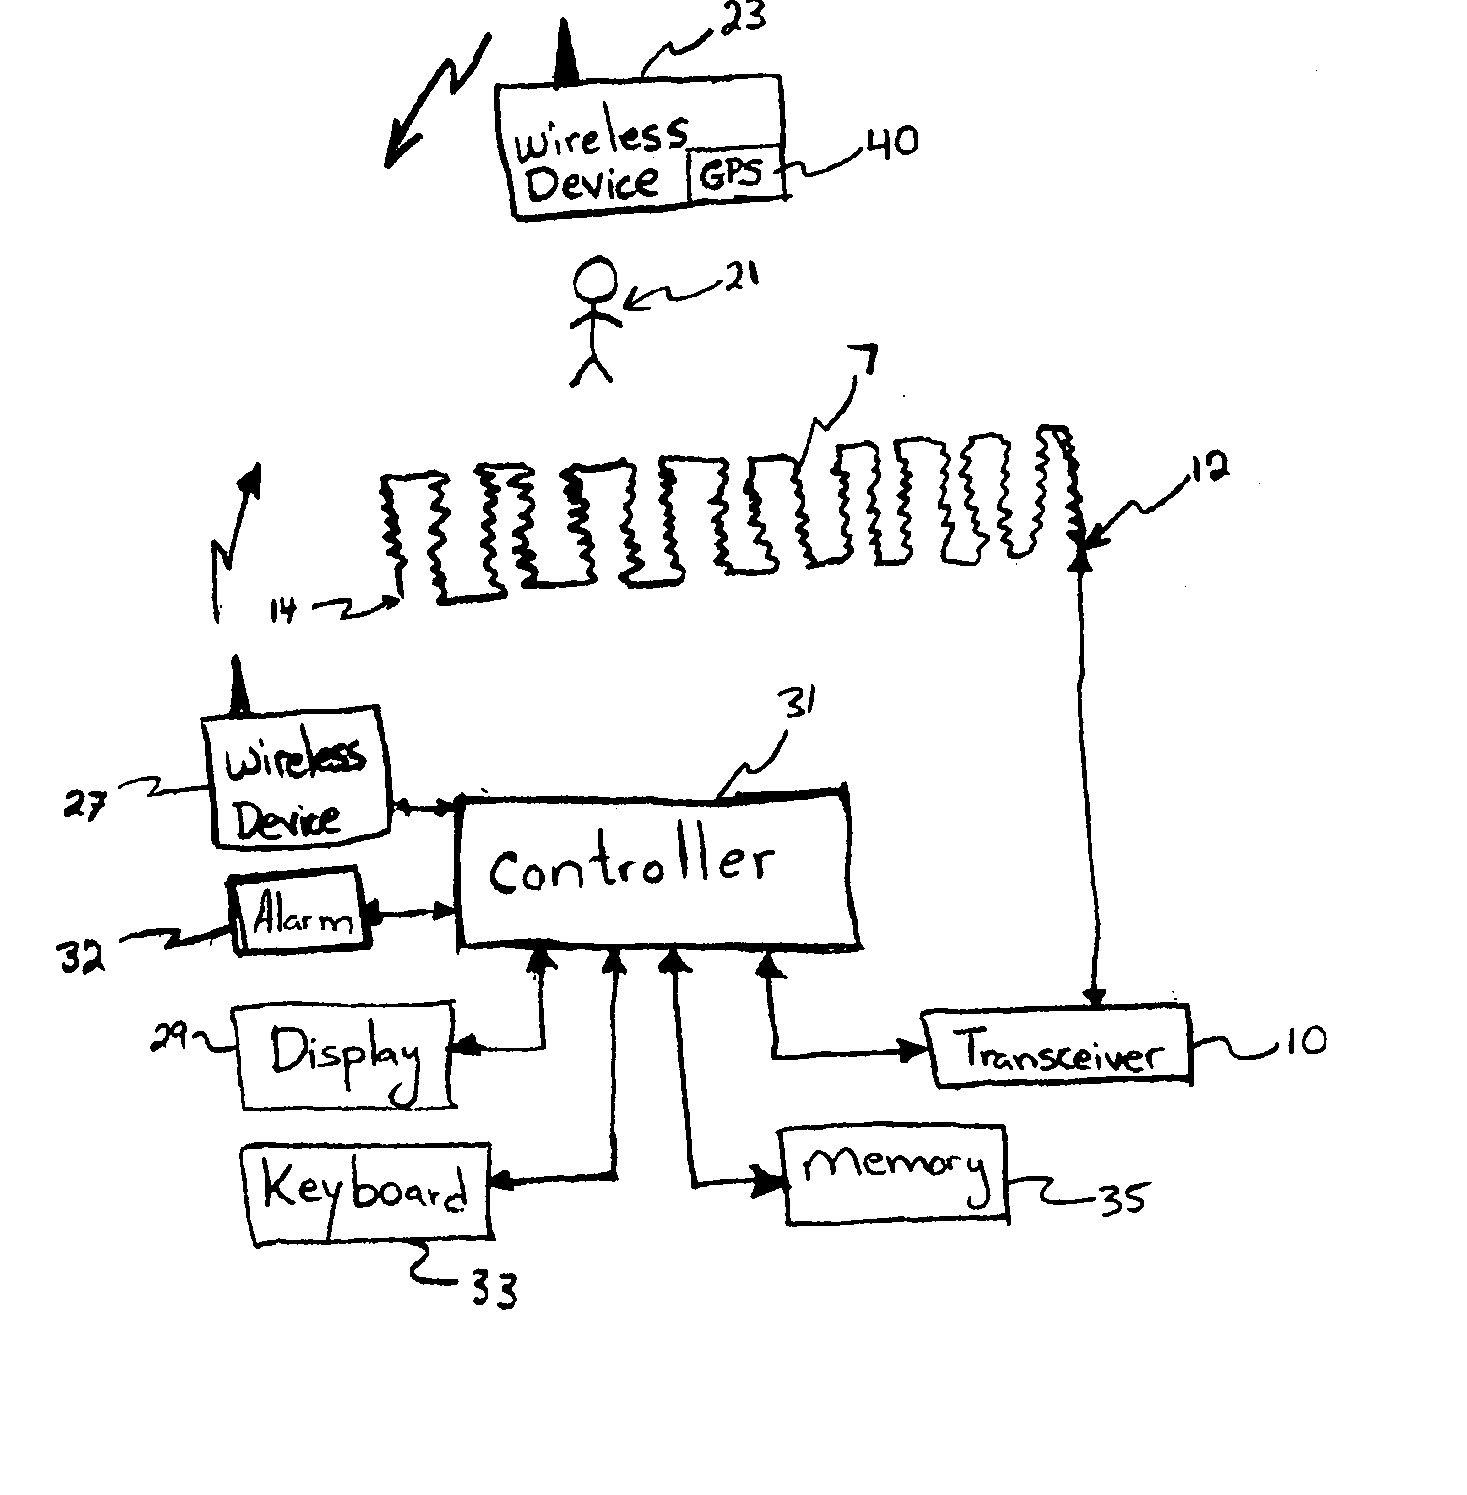 Apparatus and method to detect an intrusion point along a security fence